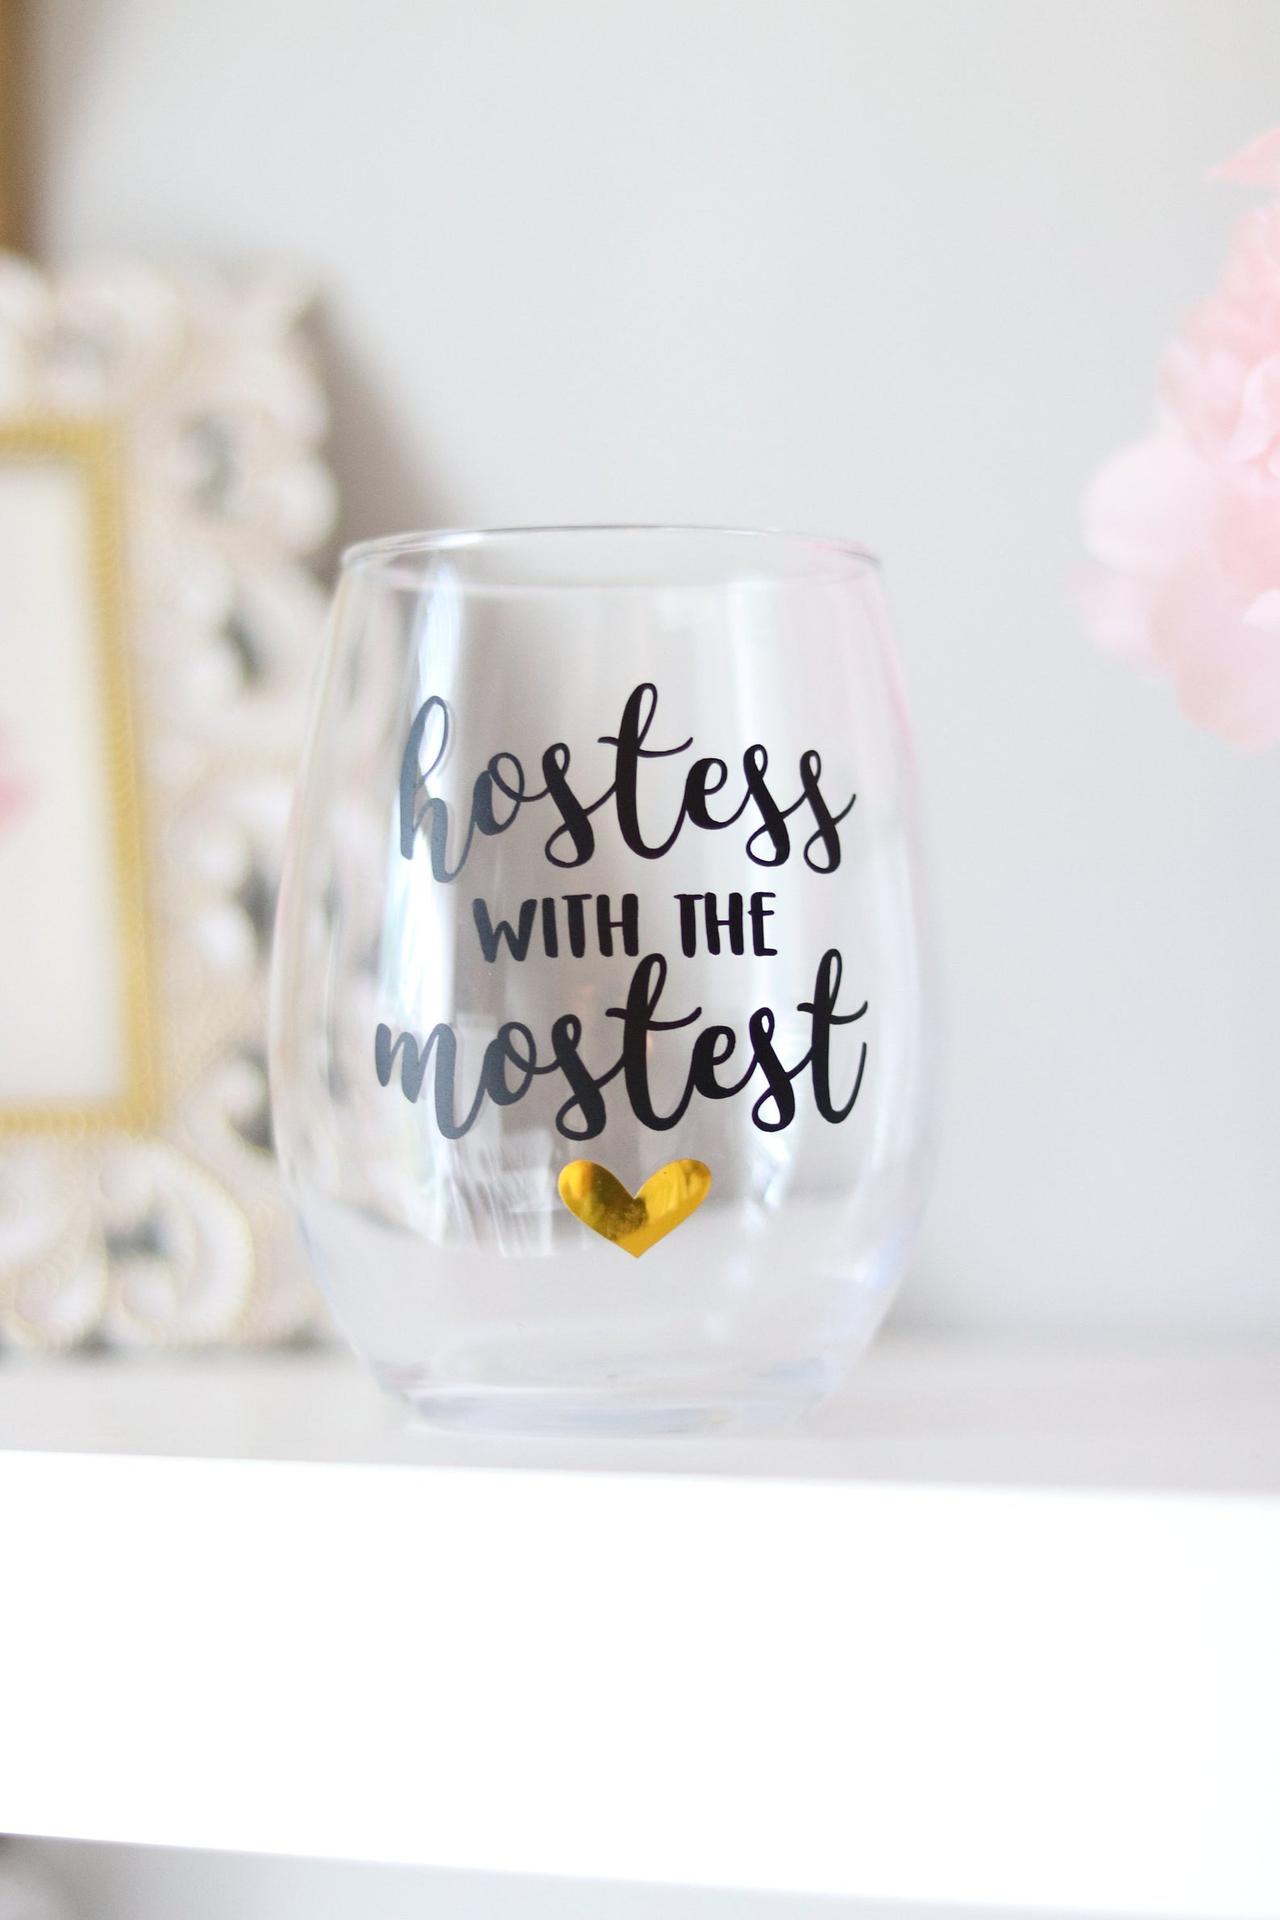 26 Bridal Shower Hostess Gifts That Are Budget Friendly